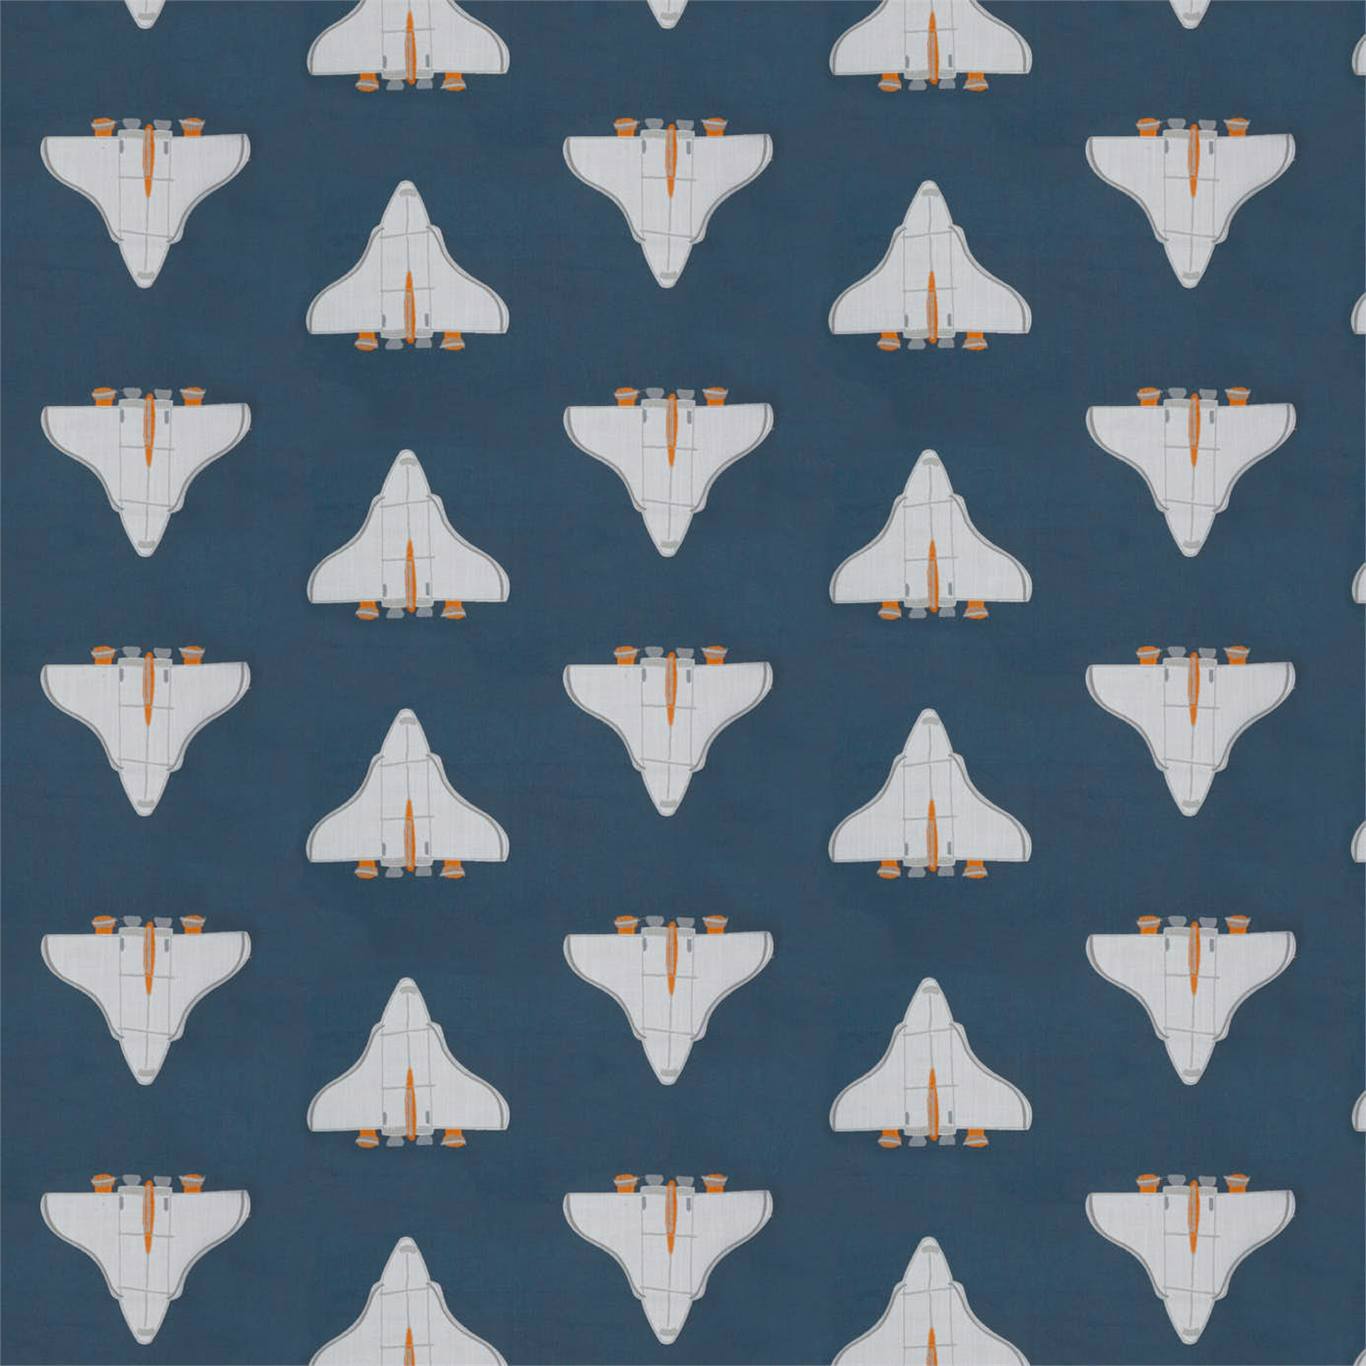 Space Shuttle Apricot/Navy Fabric by HAR